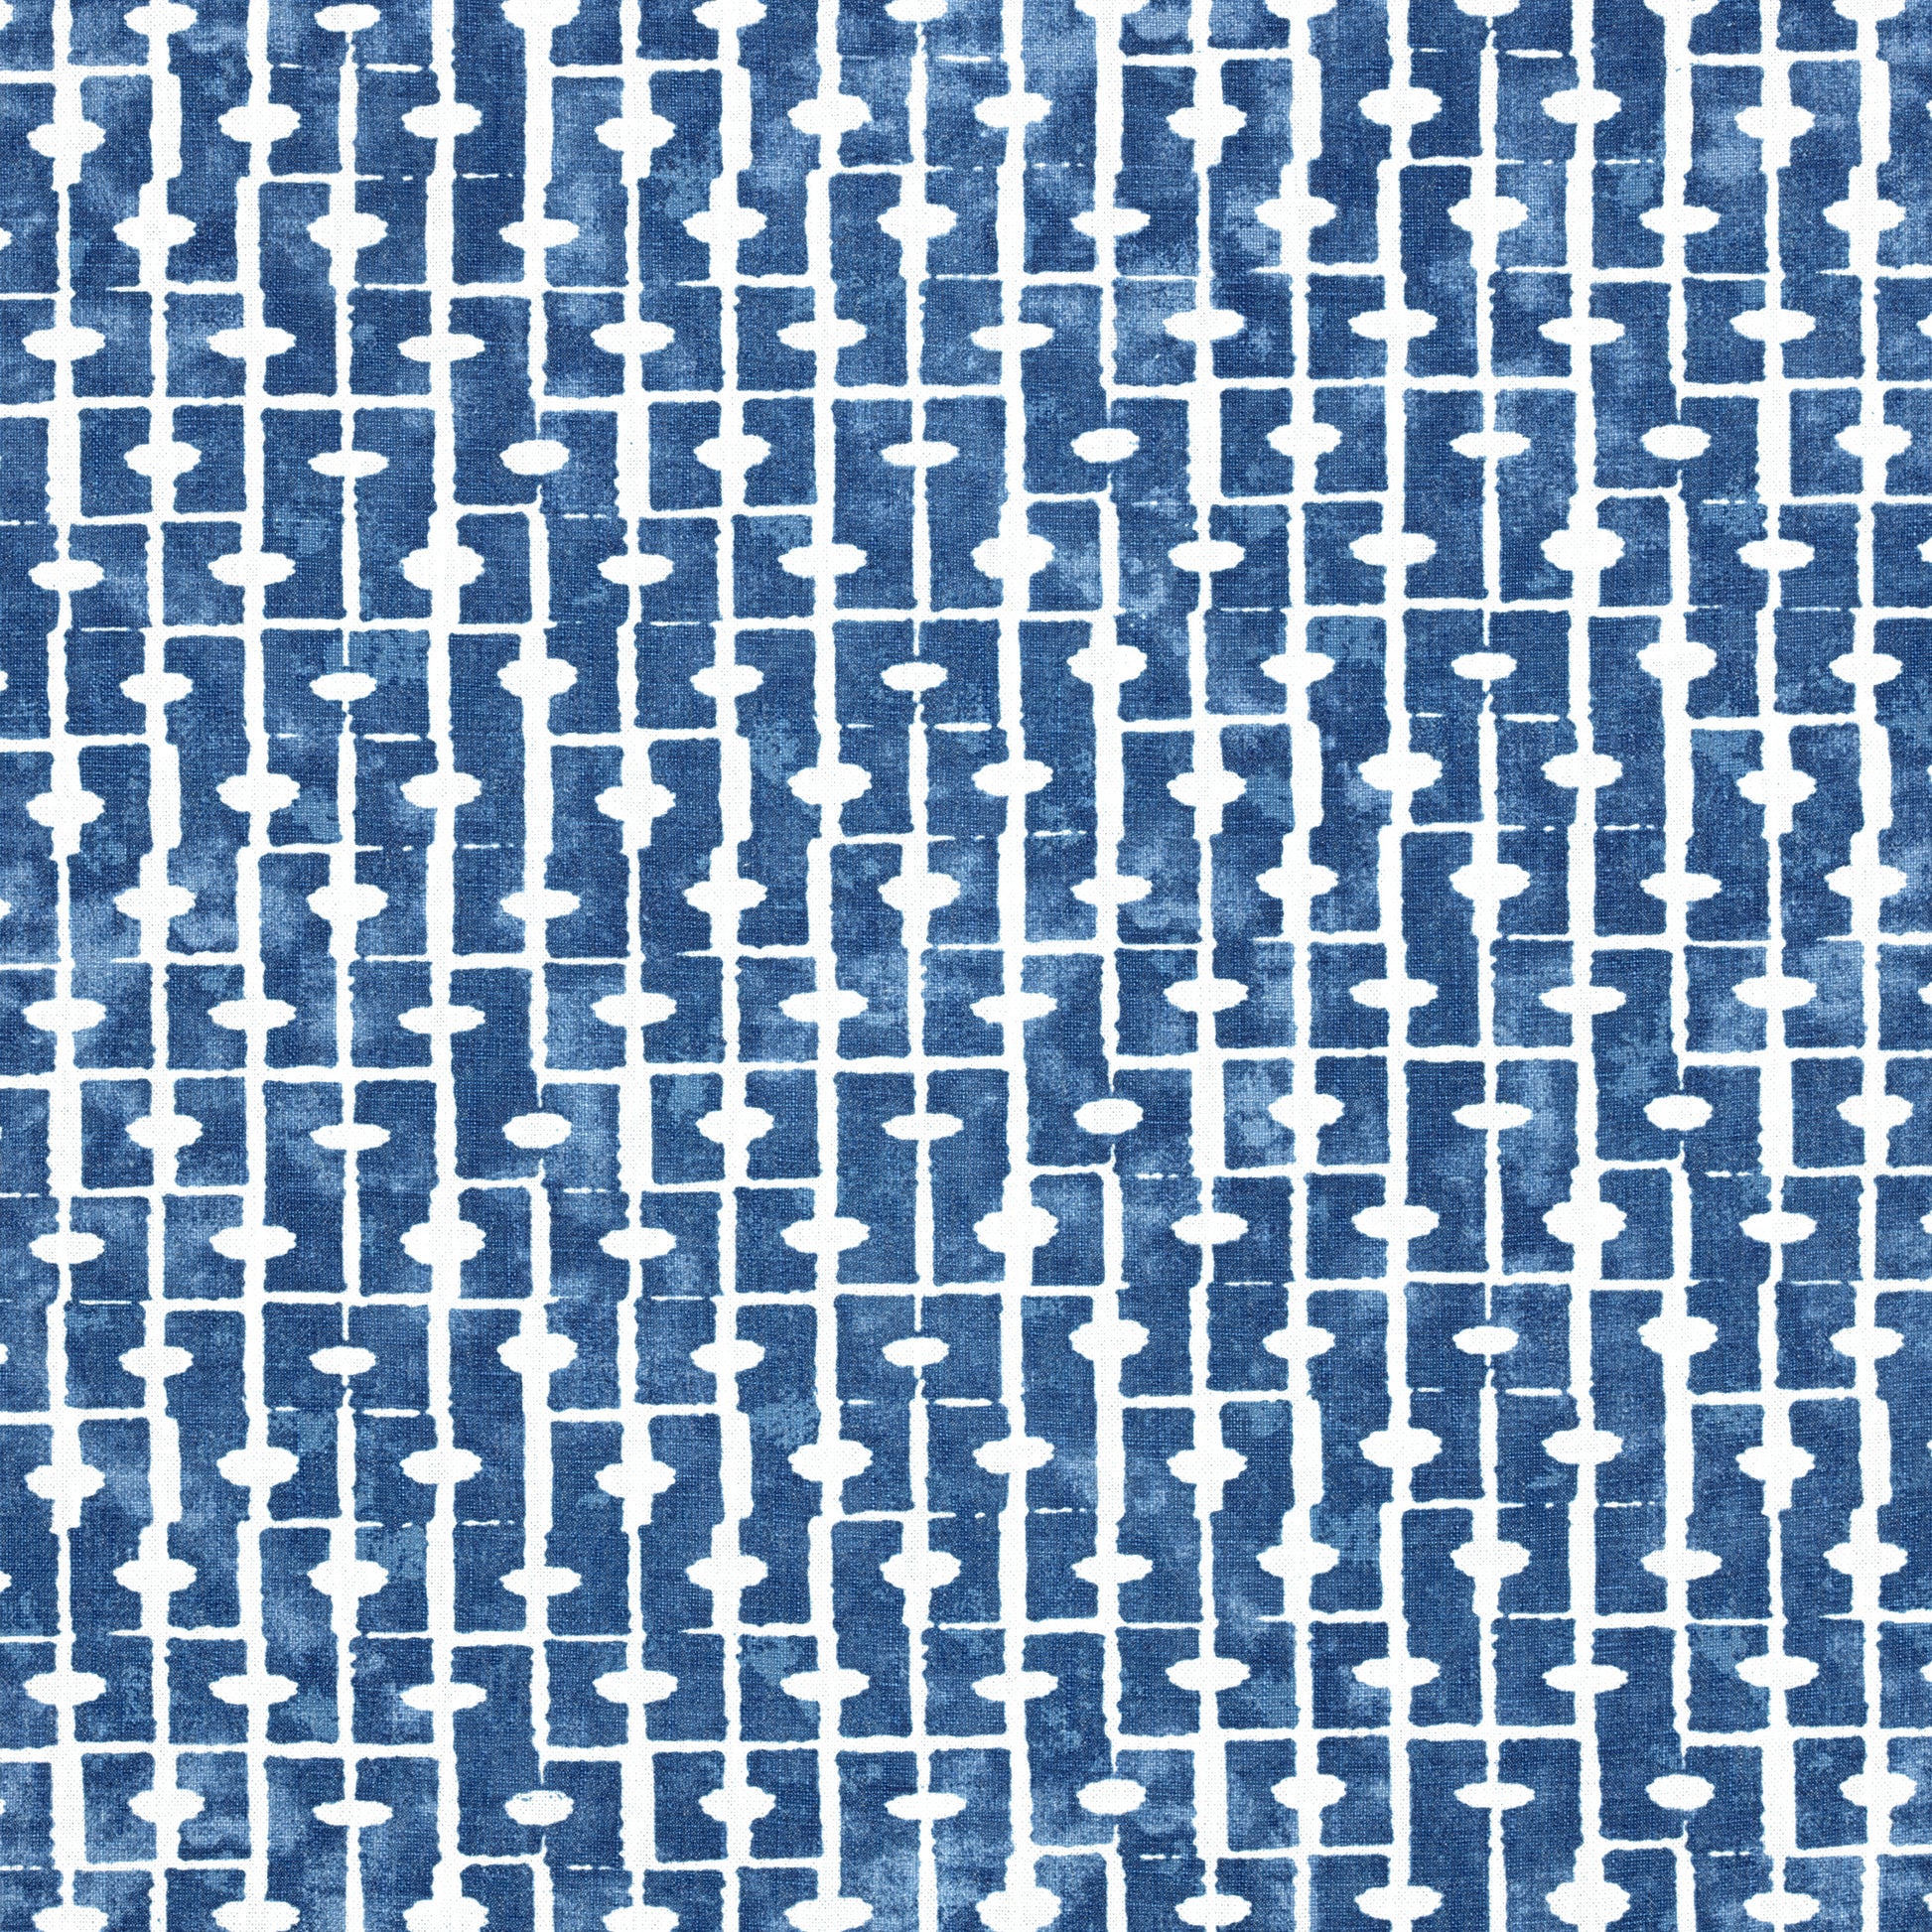 Buy samples of F914310 Haven Printed Canopy Thibaut Fabrics